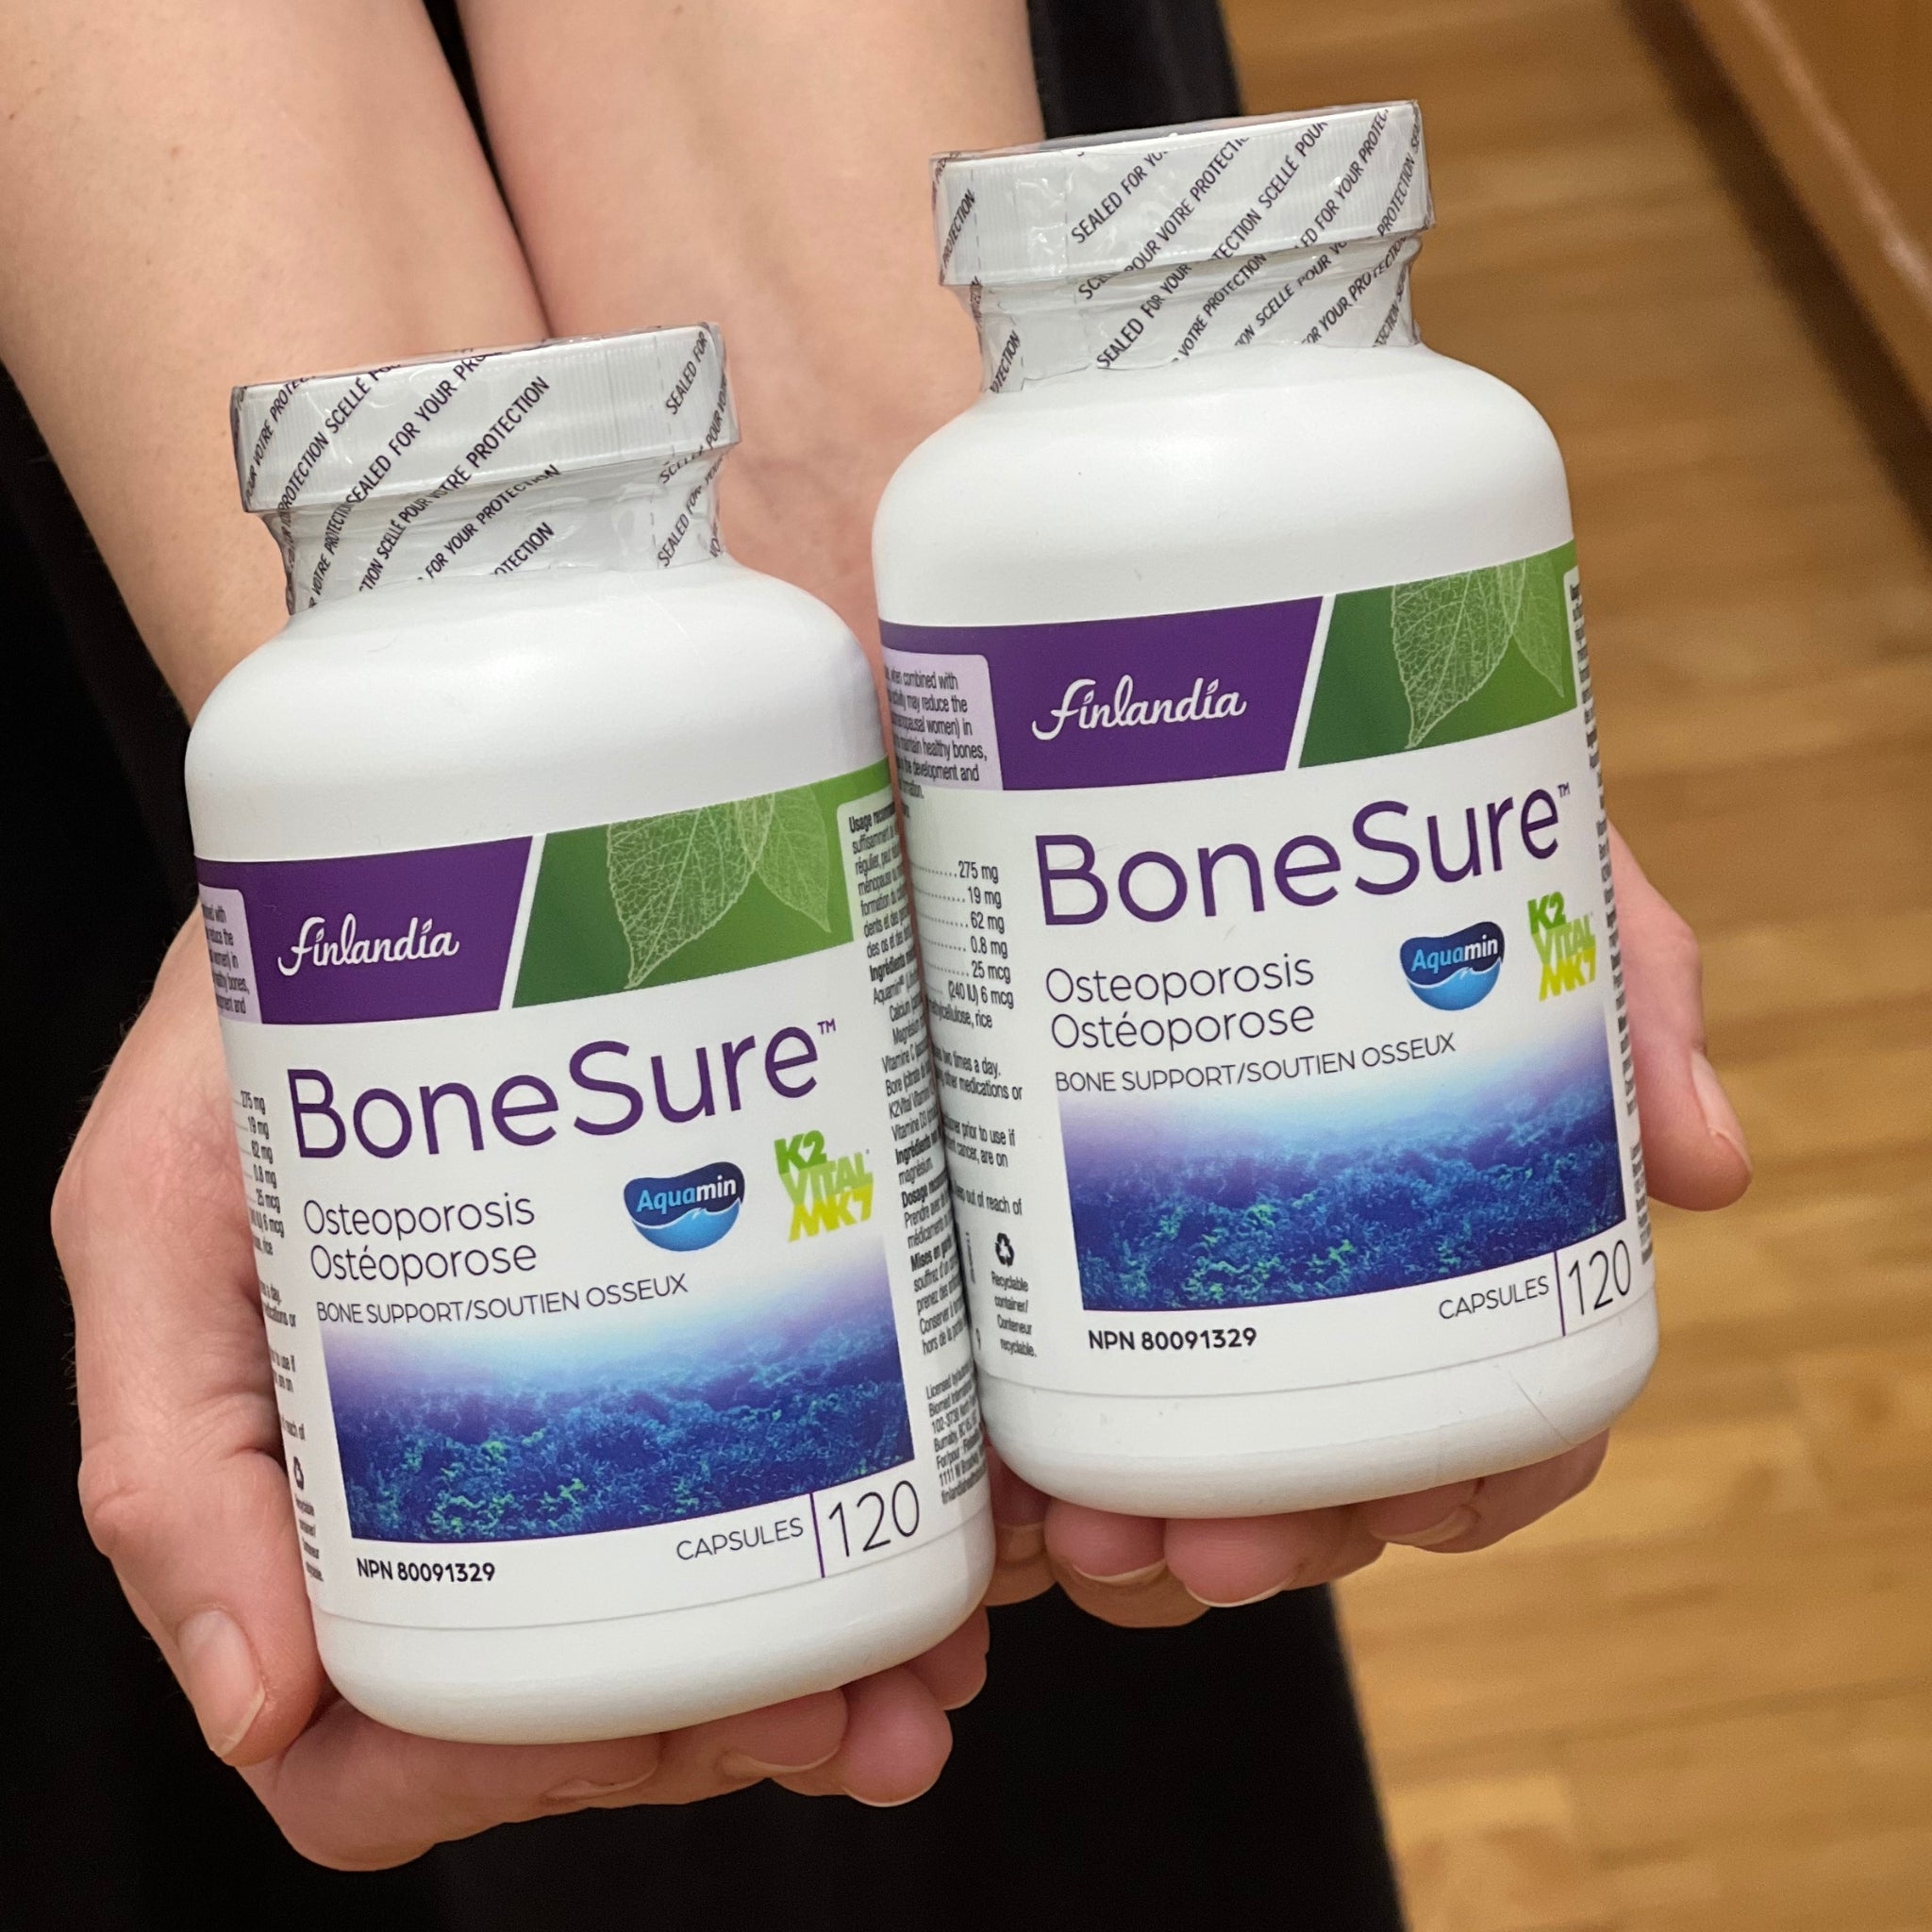 How Can You Tell If You Should Take A Bone Supplement Or Not?